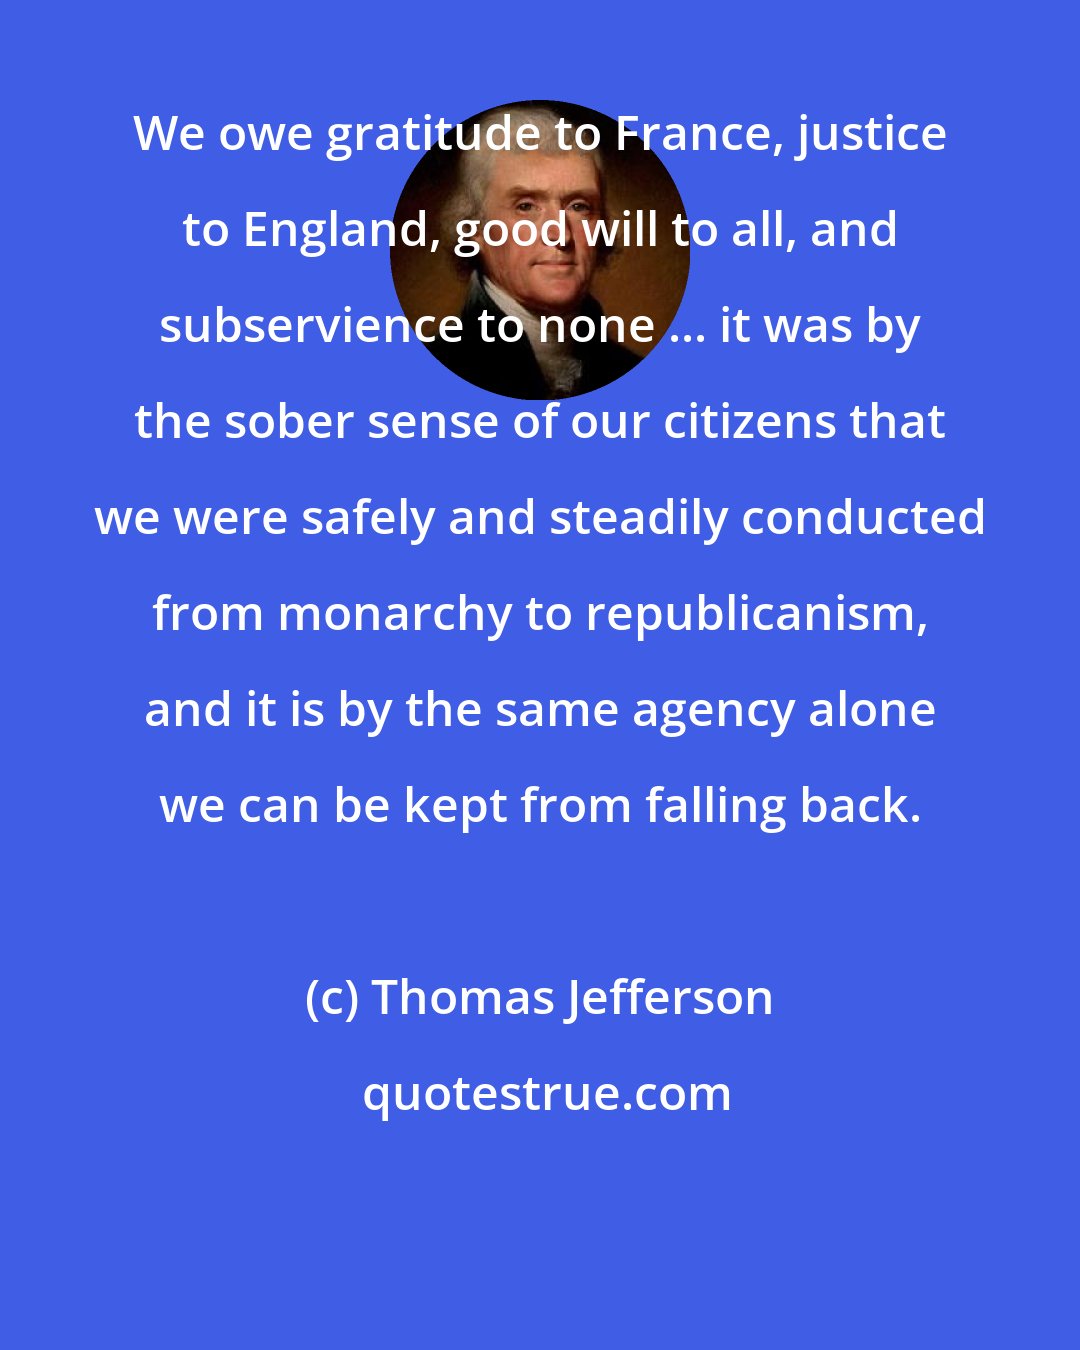 Thomas Jefferson: We owe gratitude to France, justice to England, good will to all, and subservience to none ... it was by the sober sense of our citizens that we were safely and steadily conducted from monarchy to republicanism, and it is by the same agency alone we can be kept from falling back.